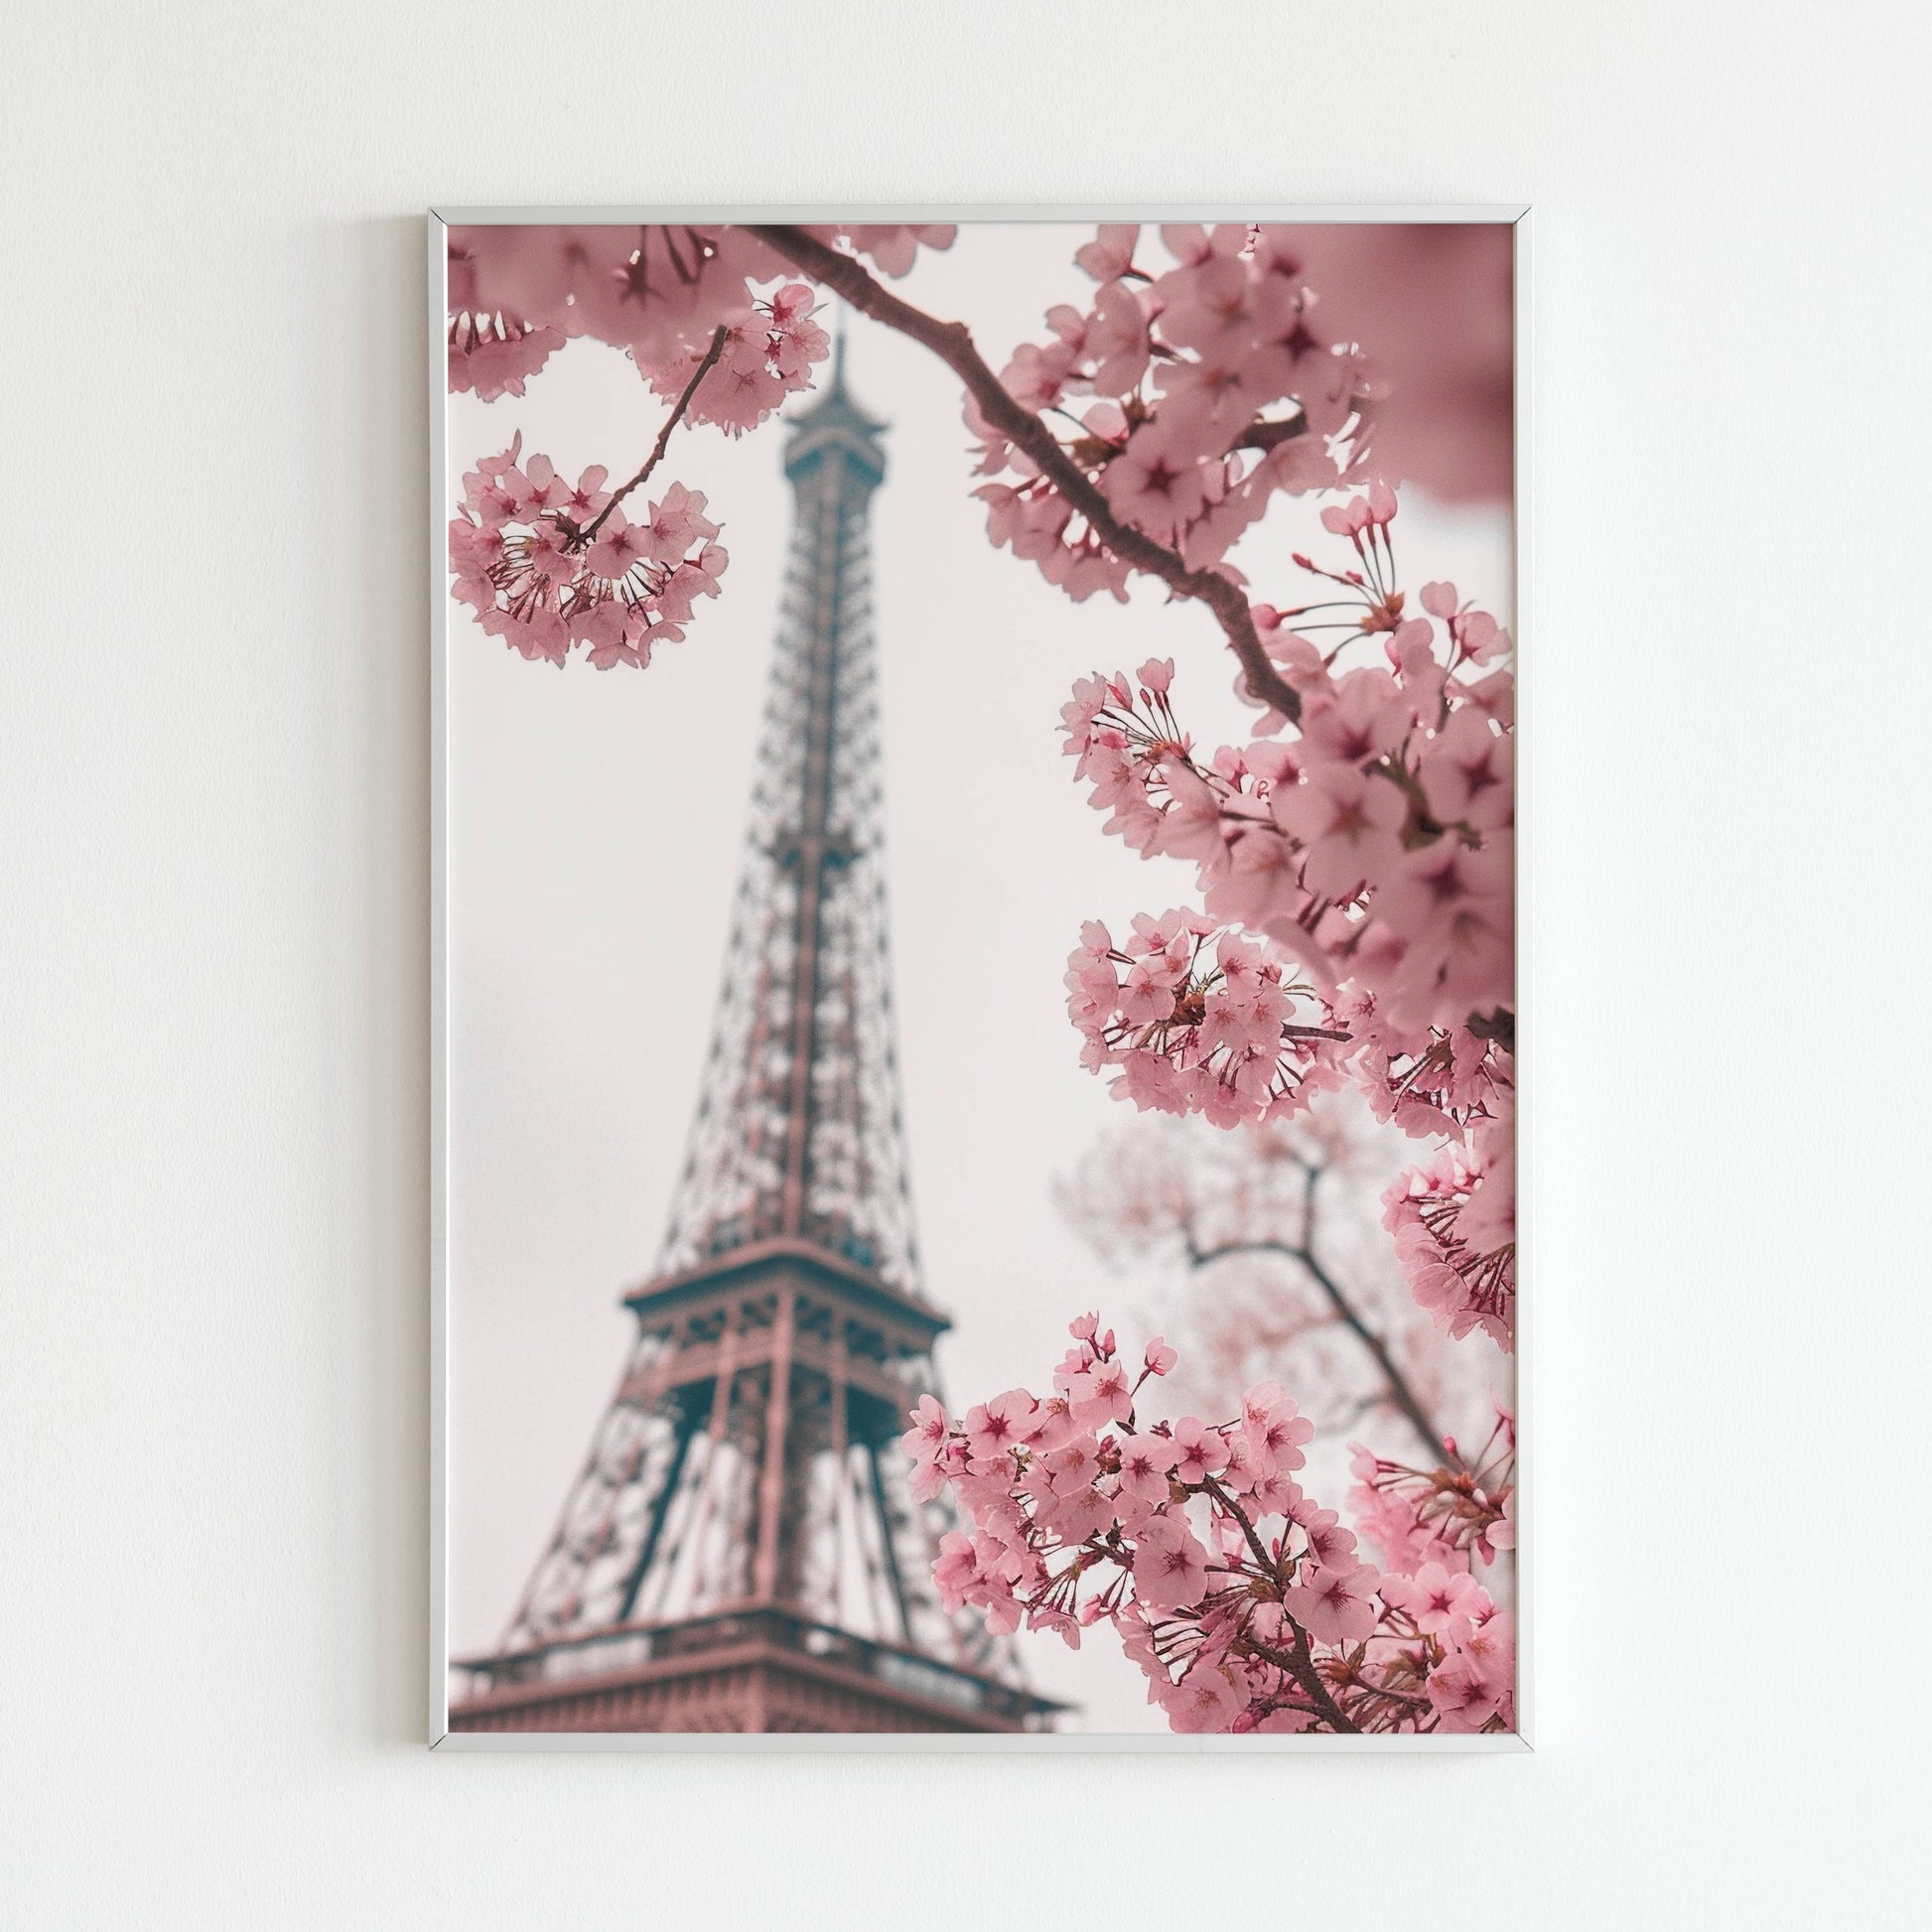 Paris Under Cherry Blossoms close-up of printable wall art poster. Focus on the details and beauty of the scene.